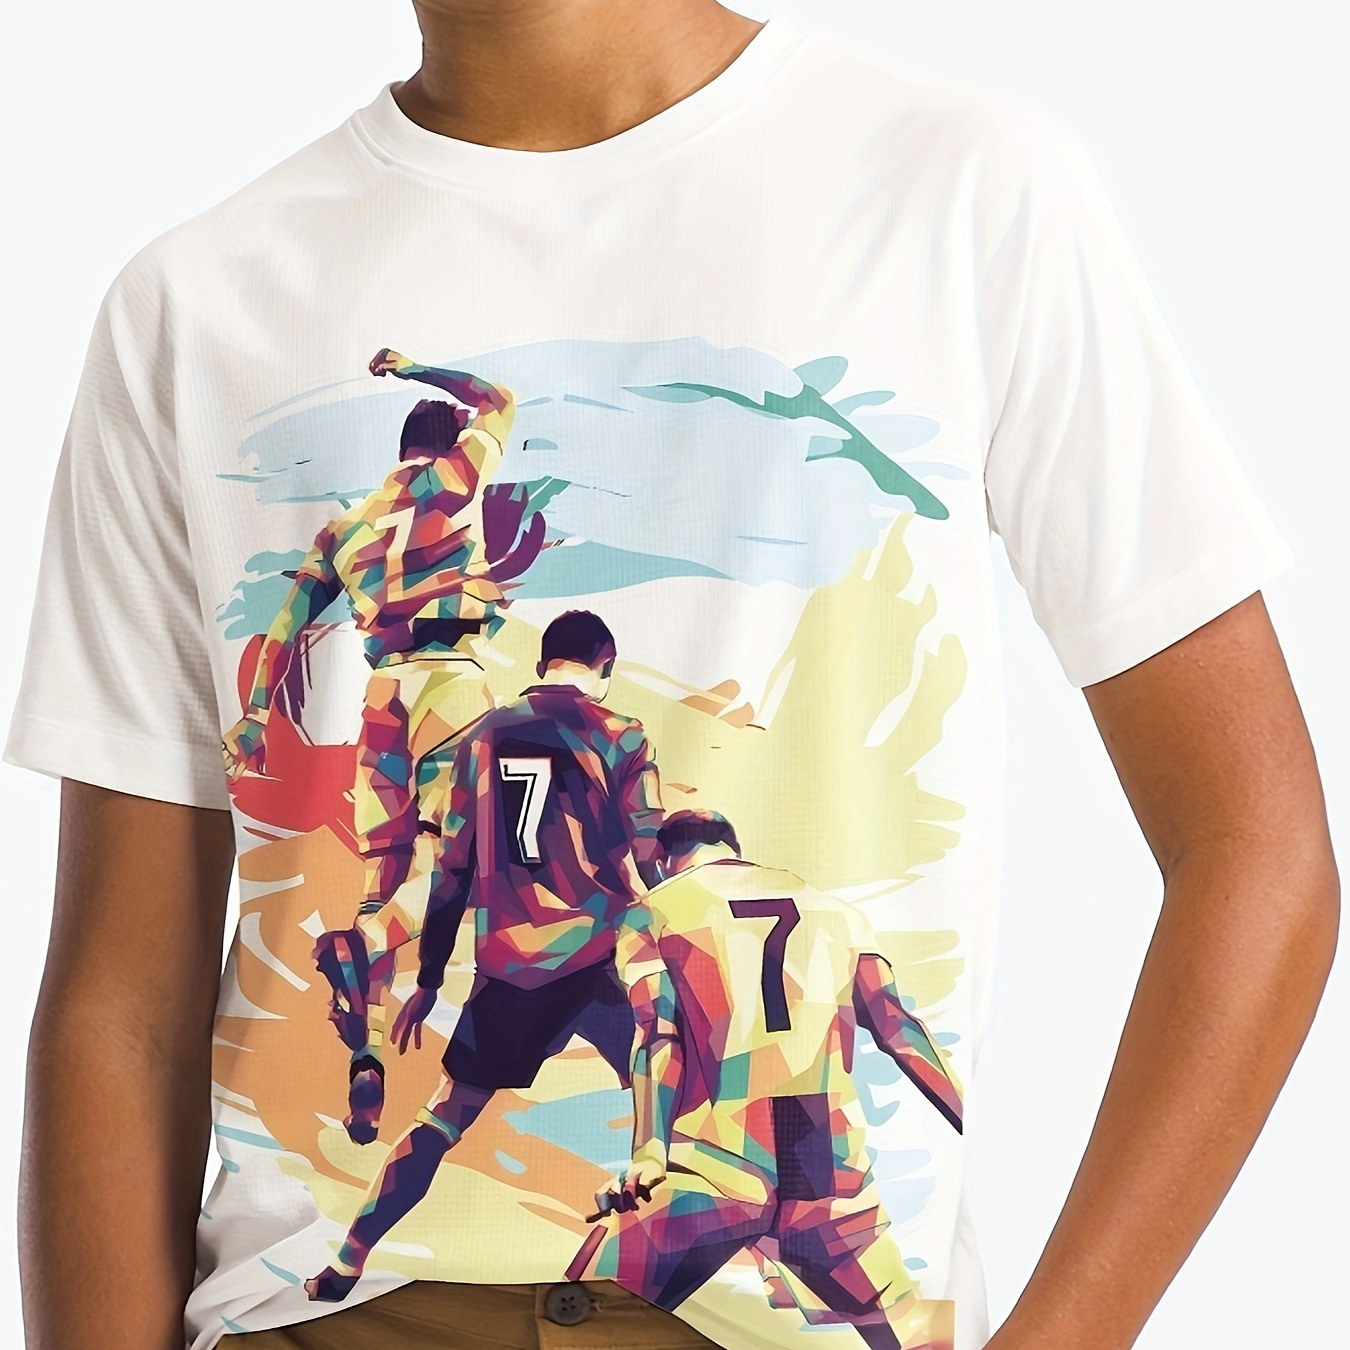 

Trendy Soccer Player 3d Print Boys T-shirt - Vibrant Short Sleeve Tee For Summer Fun - Casual Style For Boys And Girls